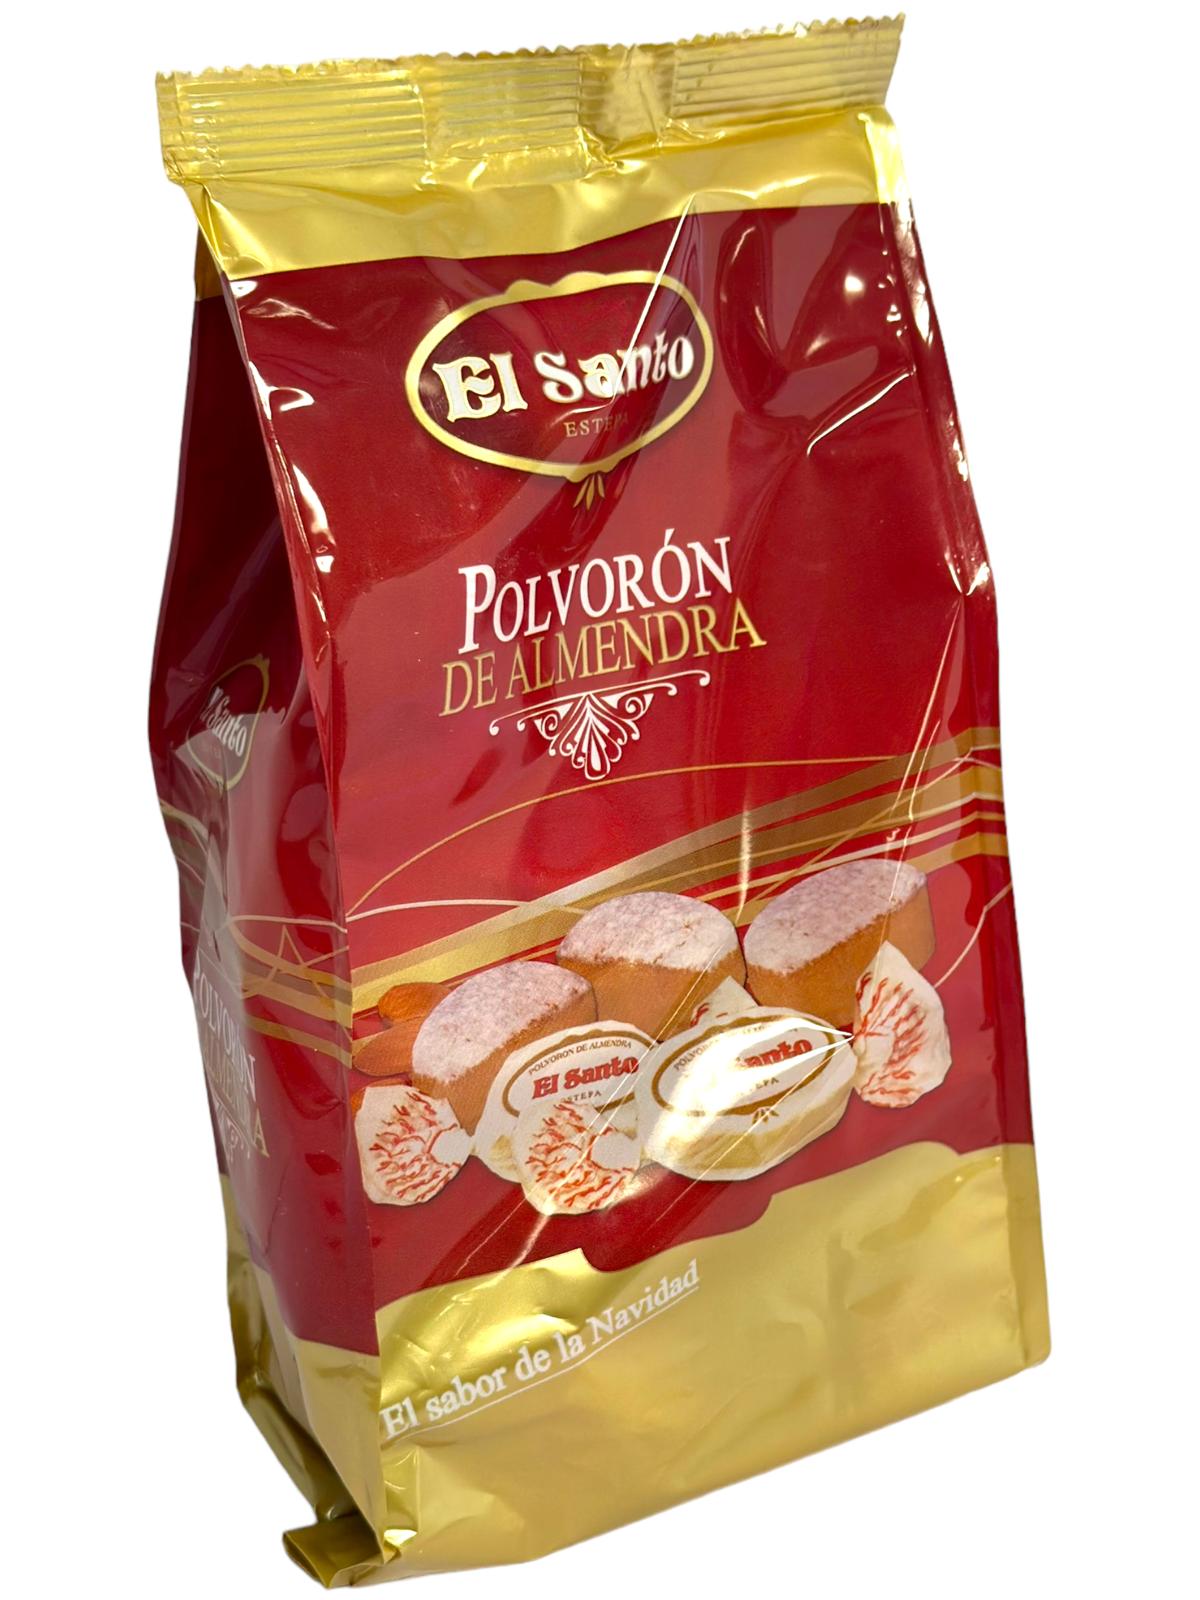 El Santo Polvoron de Almendra with Manteca Spanish Almond Biscuits 400g- Twin Pack 800g Total